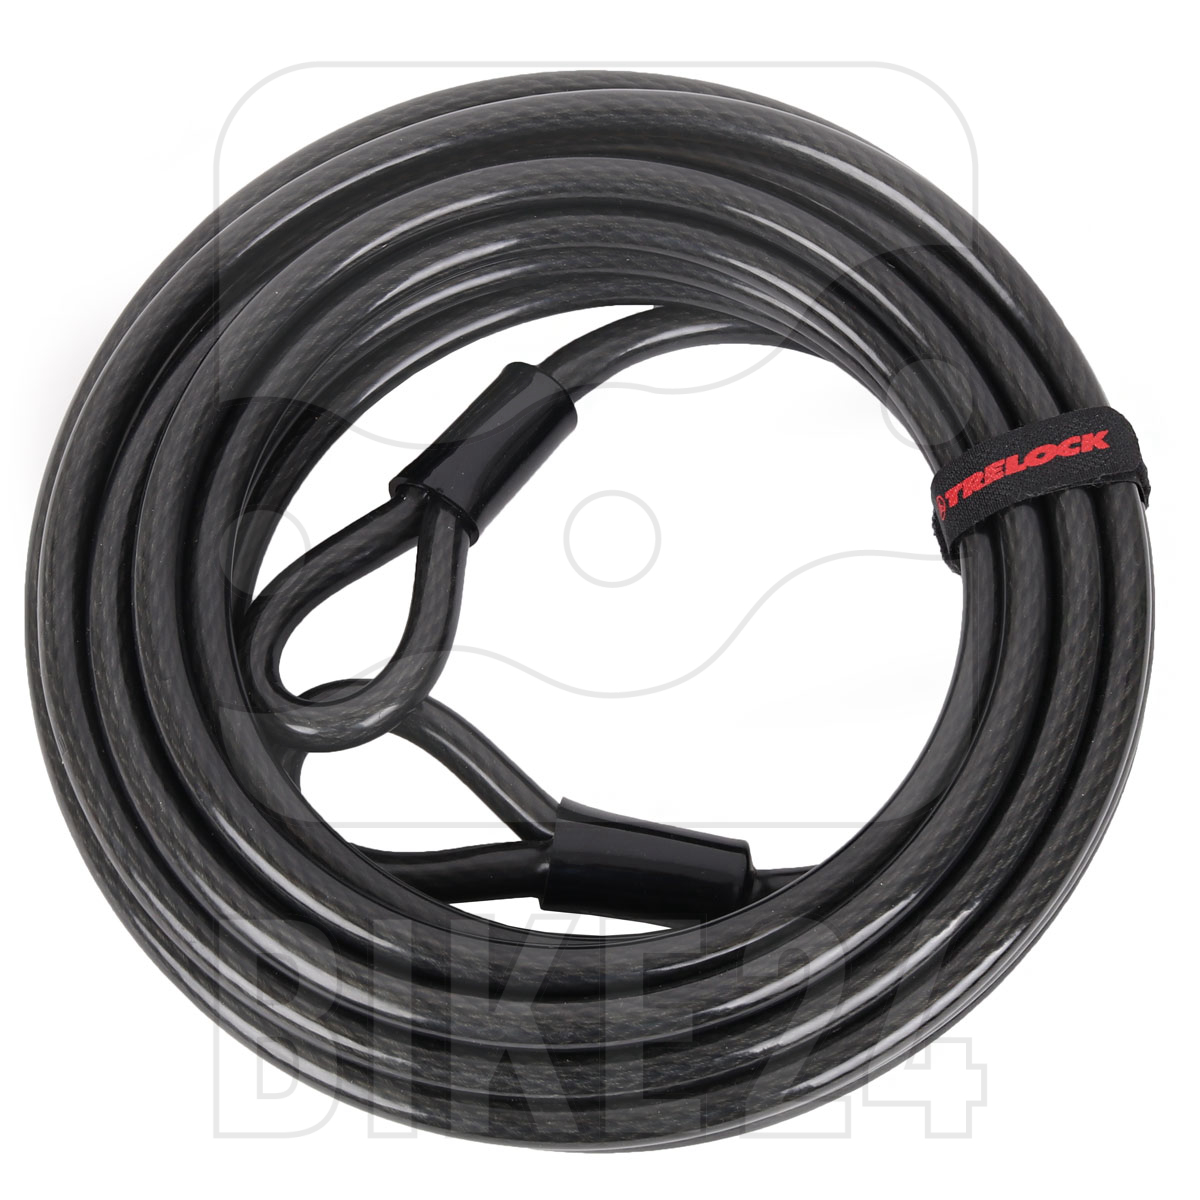 Picture of Trelock ZS 1000/12 Loop Cable